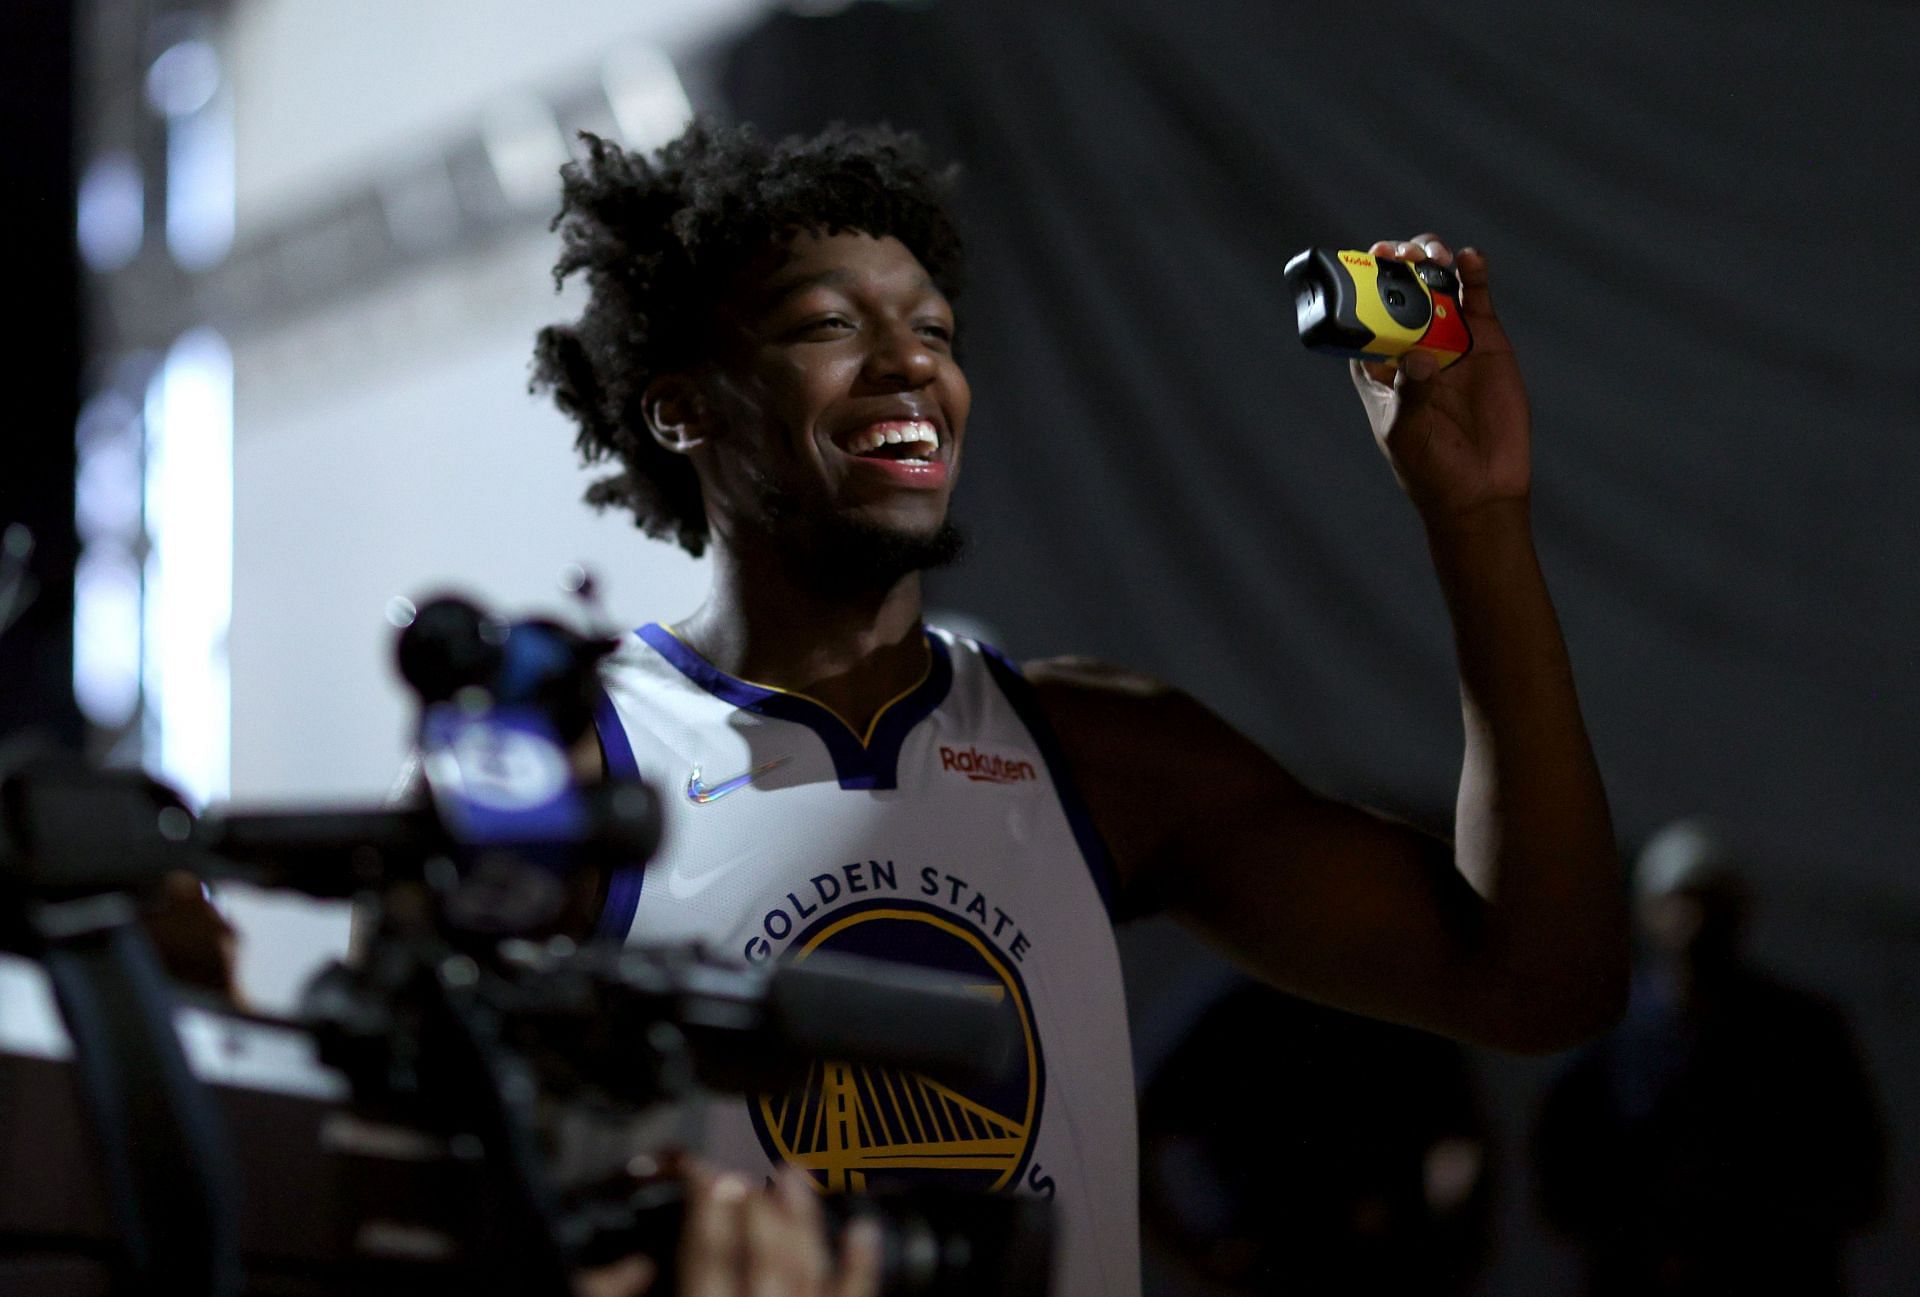 James Wiseman: The Inspiring Story of How James Wiseman Became the